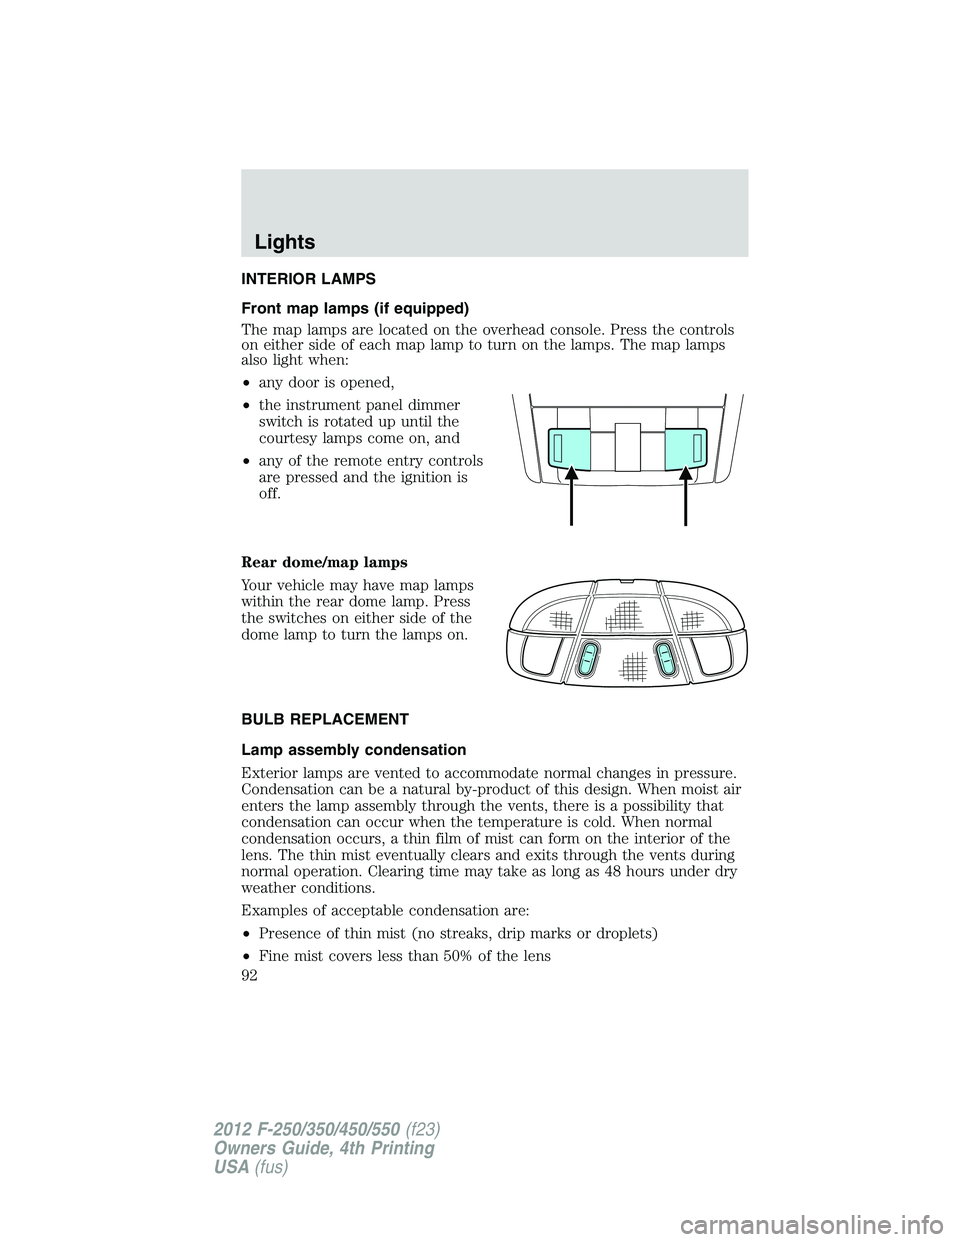 FORD F450 2012  Owners Manual INTERIOR LAMPS
Front map lamps (if equipped)
The map lamps are located on the overhead console. Press the controls
on either side of each map lamp to turn on the lamps. The map lamps
also light when:
